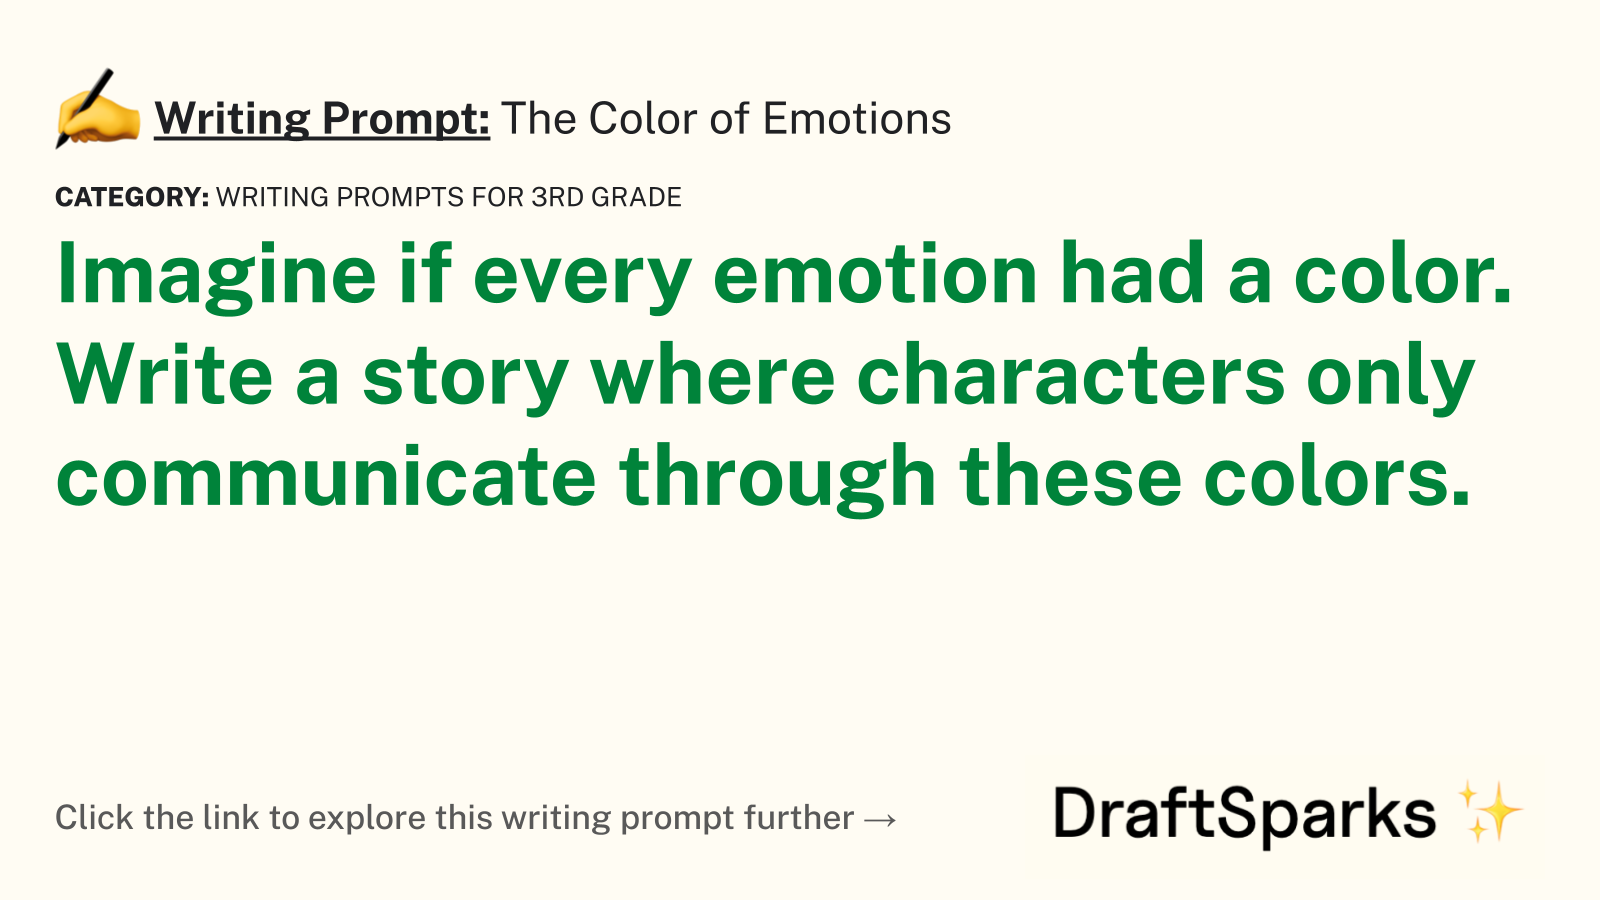 The Color of Emotions